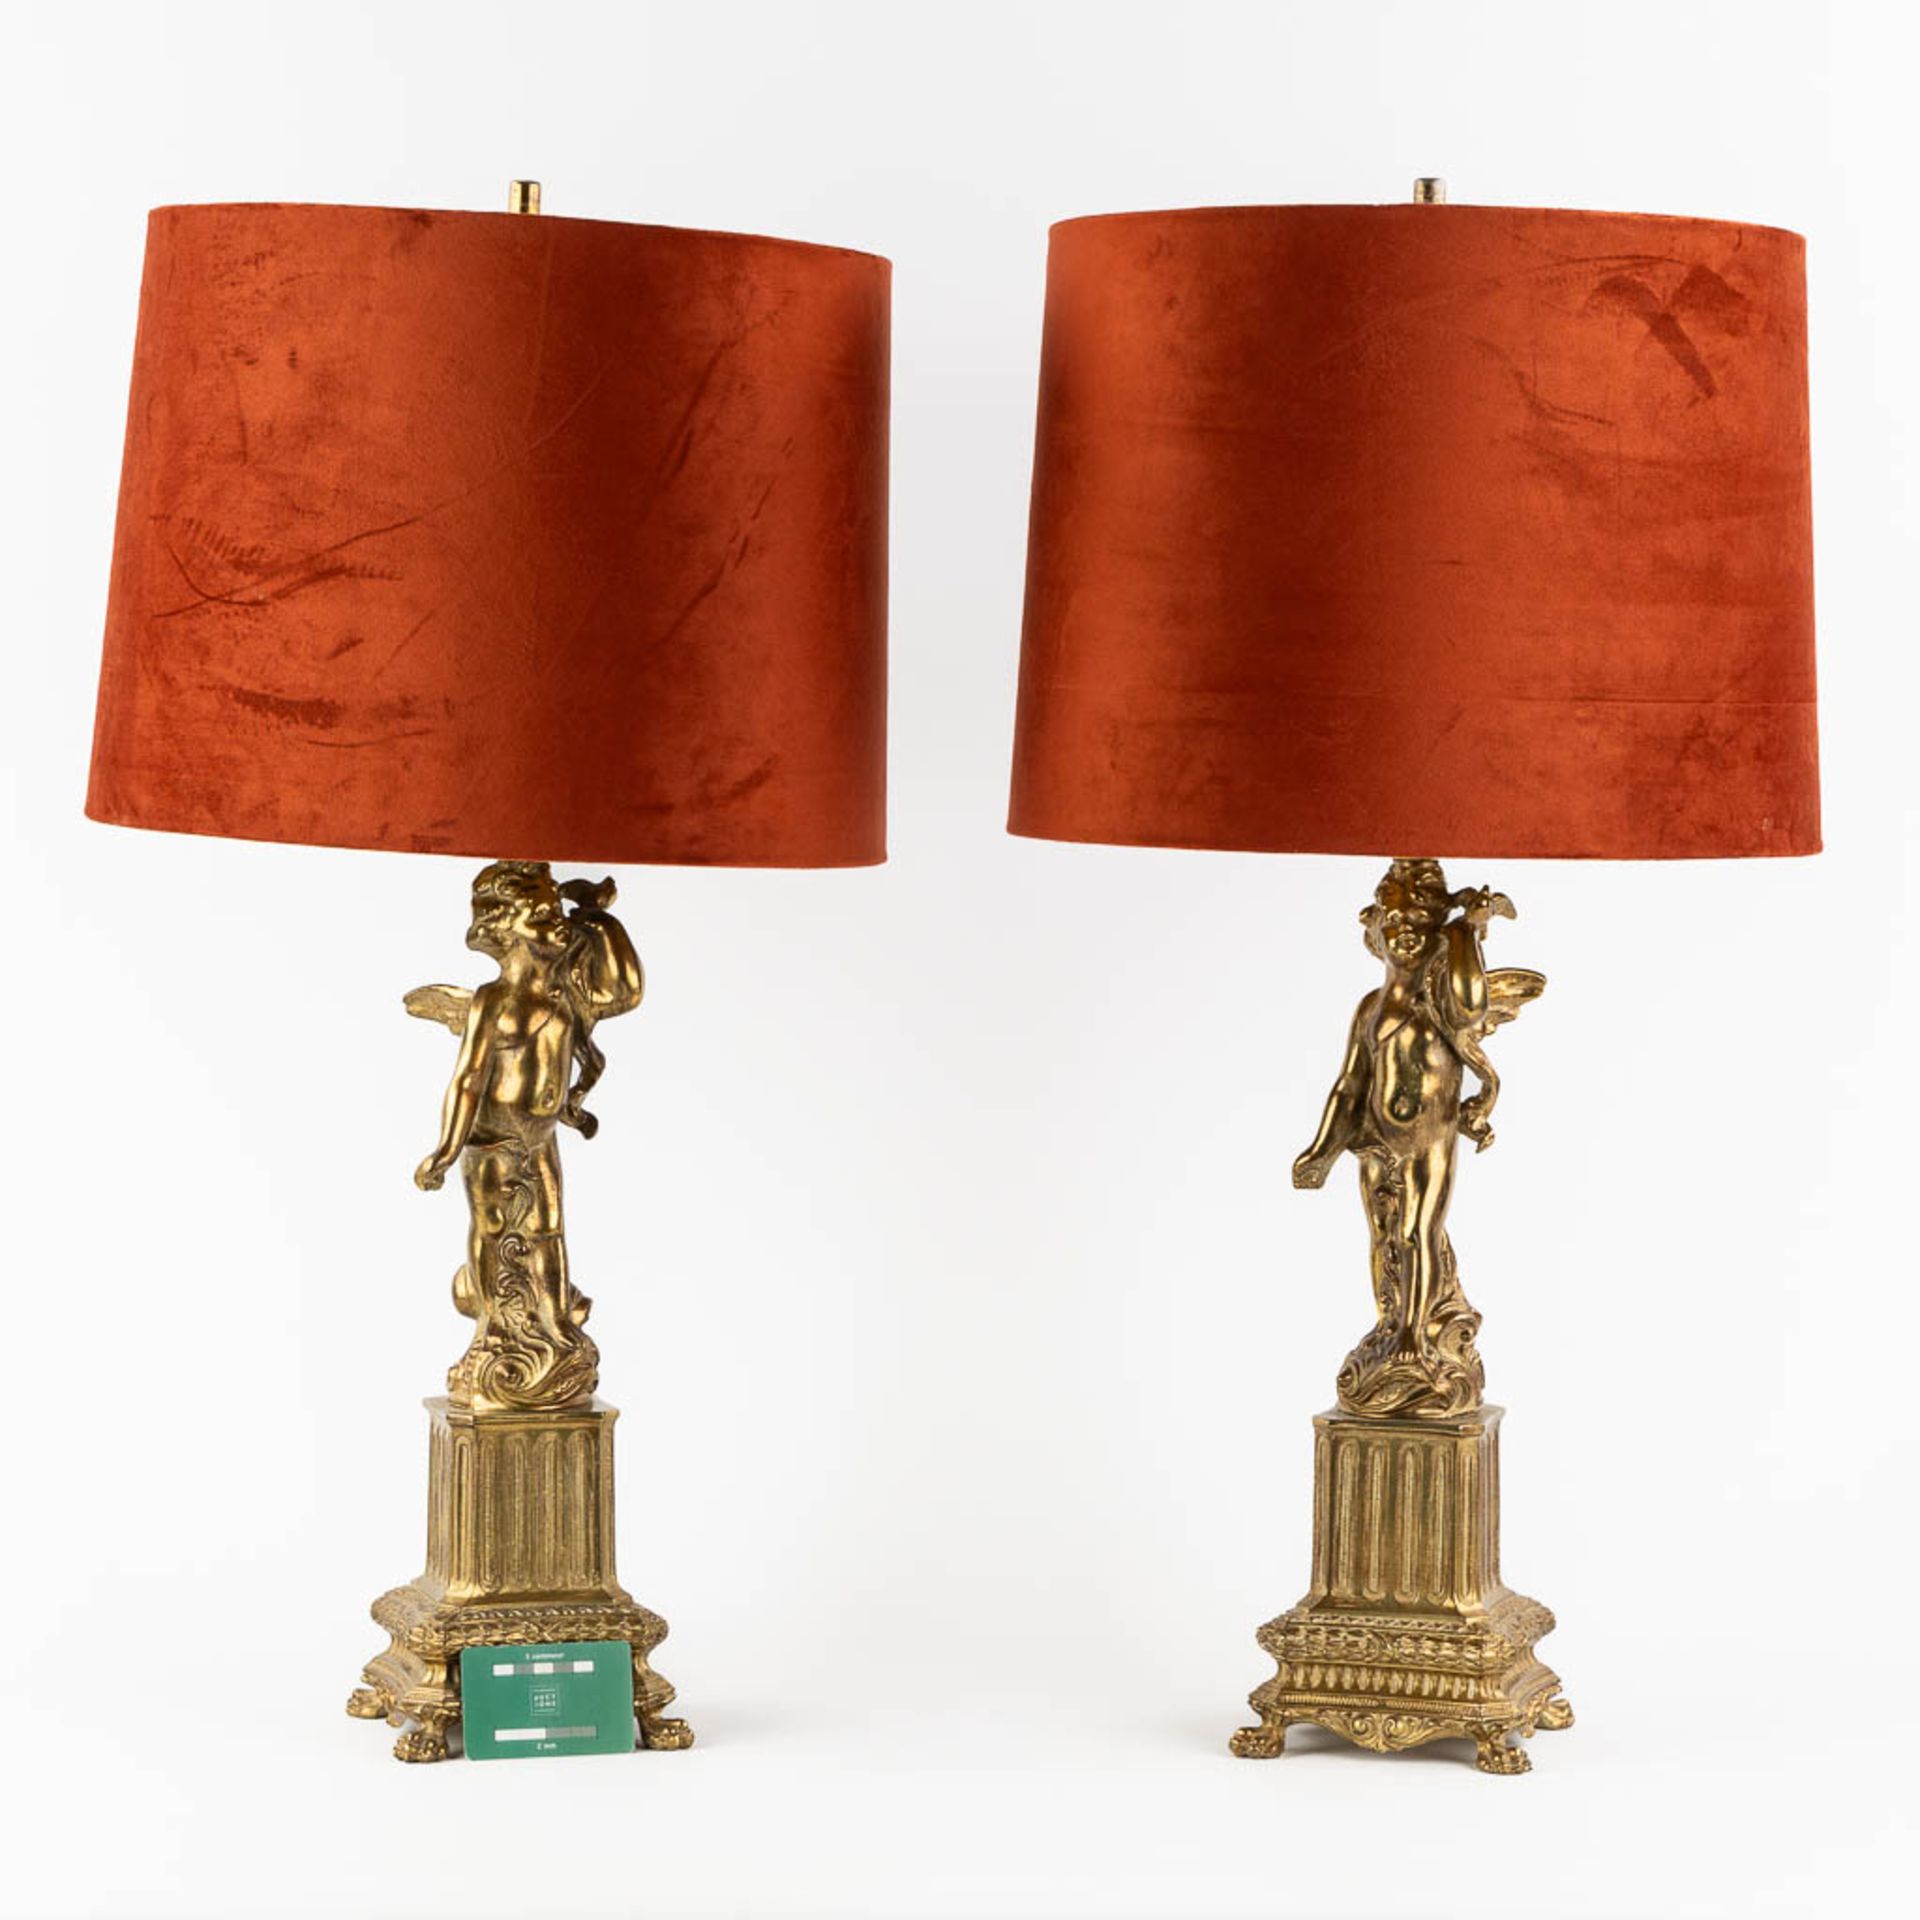 A pair of decorative table lamps, messing. 20th century. (L:15 x W:15 x H:78 cm) - Image 2 of 11